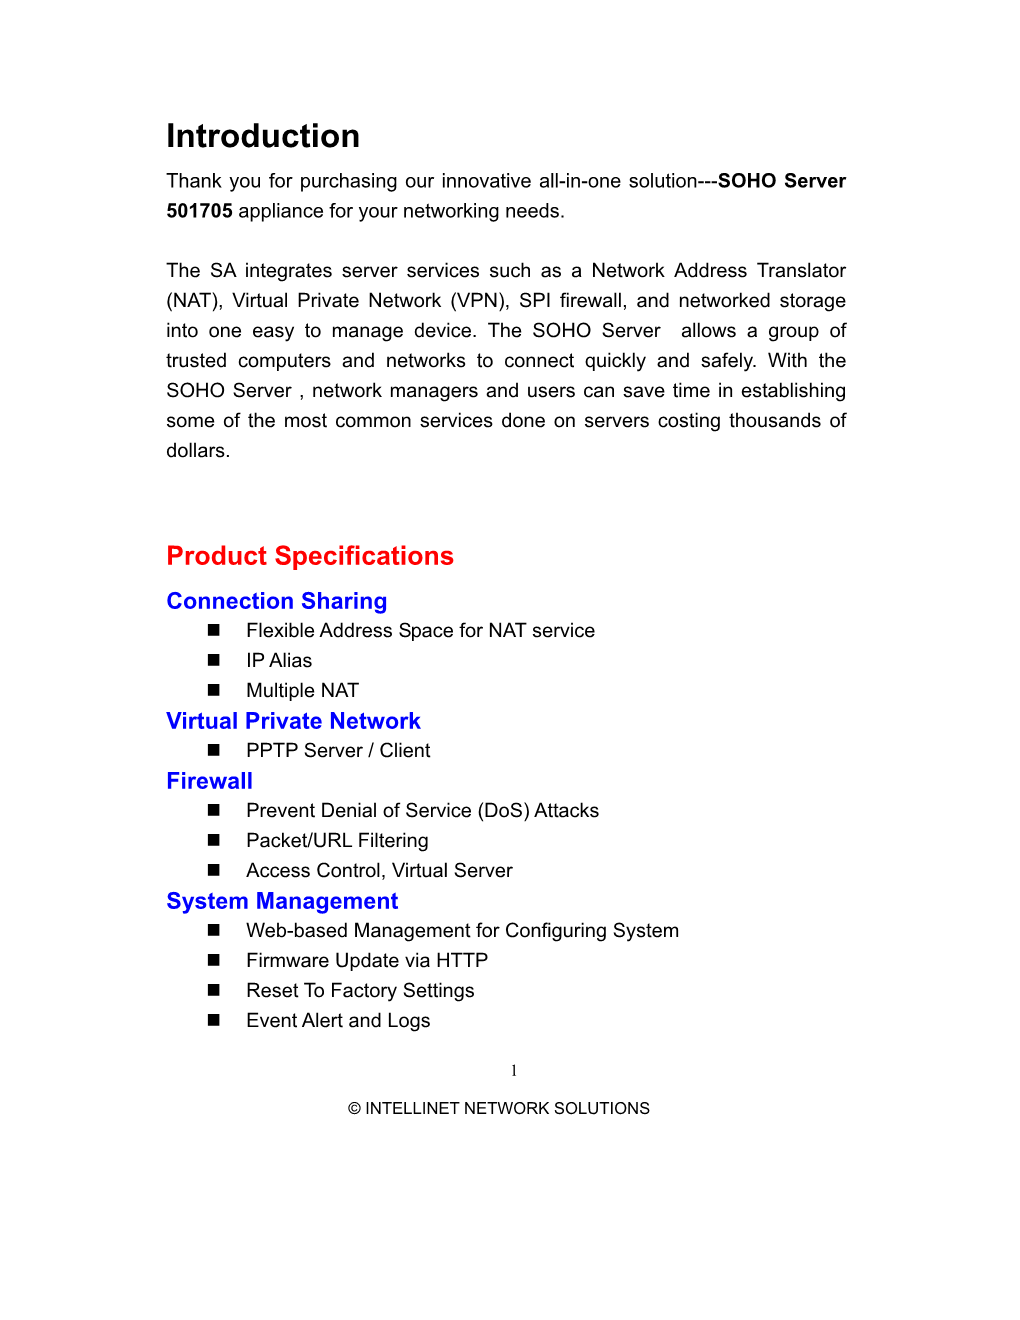 INTELLINET NETWORK SOLUTIONS „ System Information